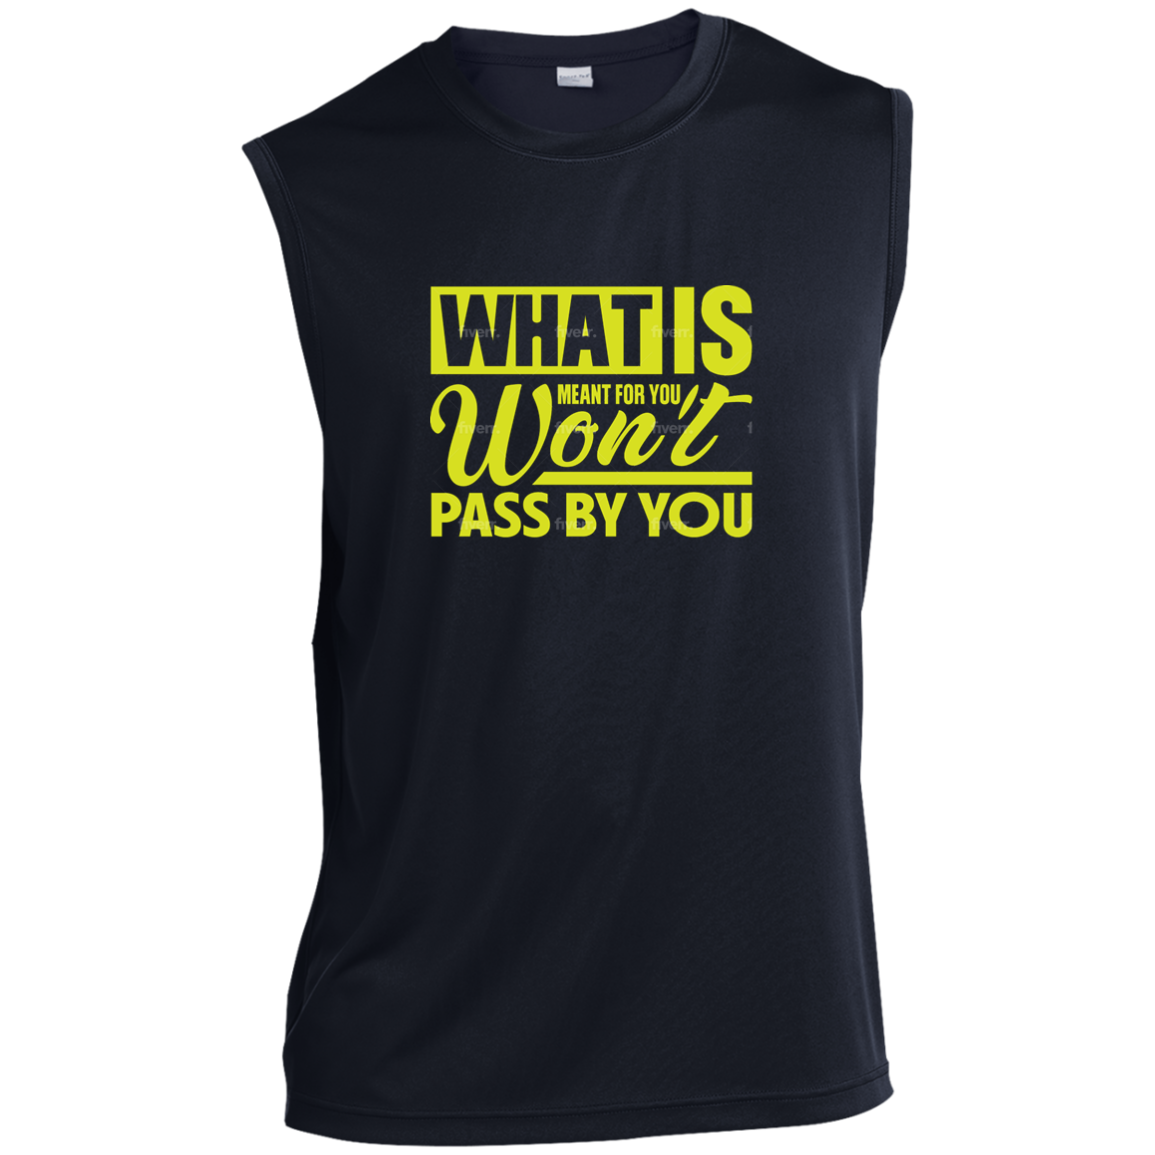 WHAT IS FOR YOU Sleeveless Performance Tee